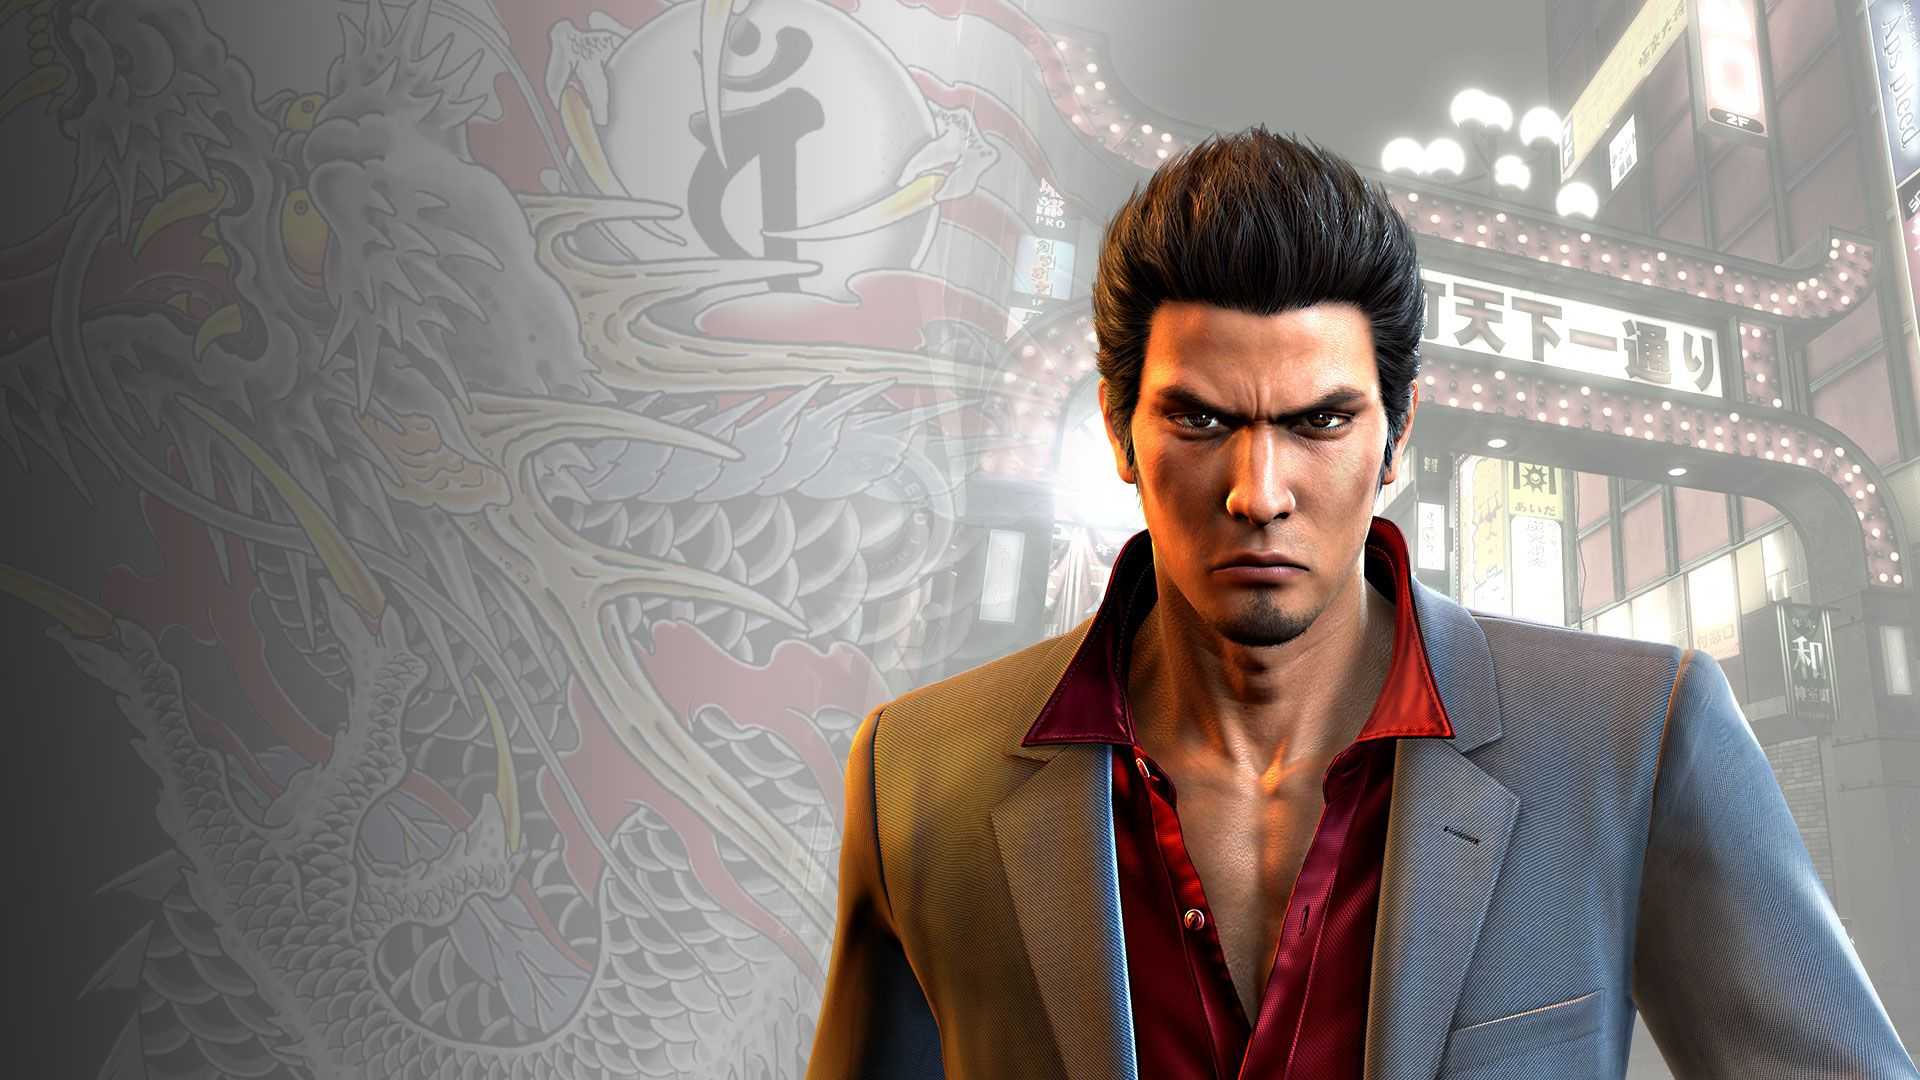 Yakuza: like a dragon test answers: all exam solutions for ounabara vocational school